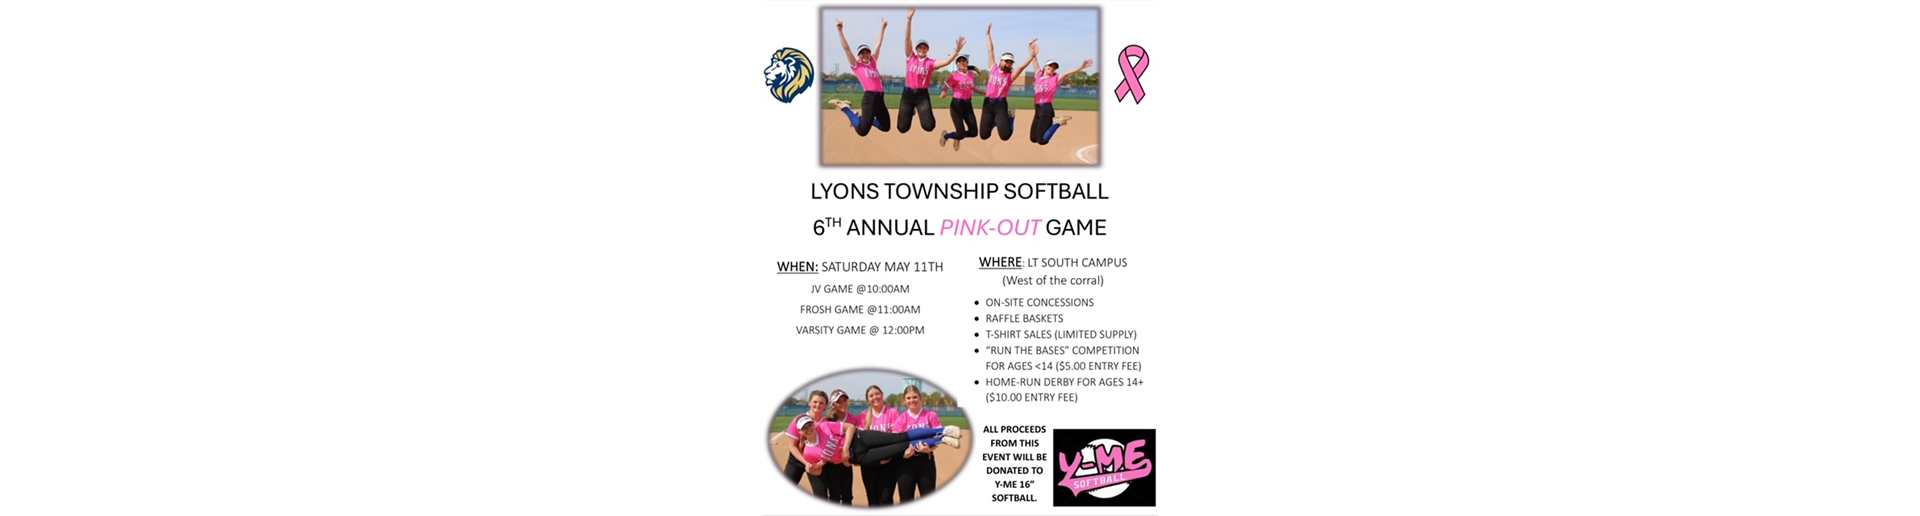 LT Softball Pink-Out Game